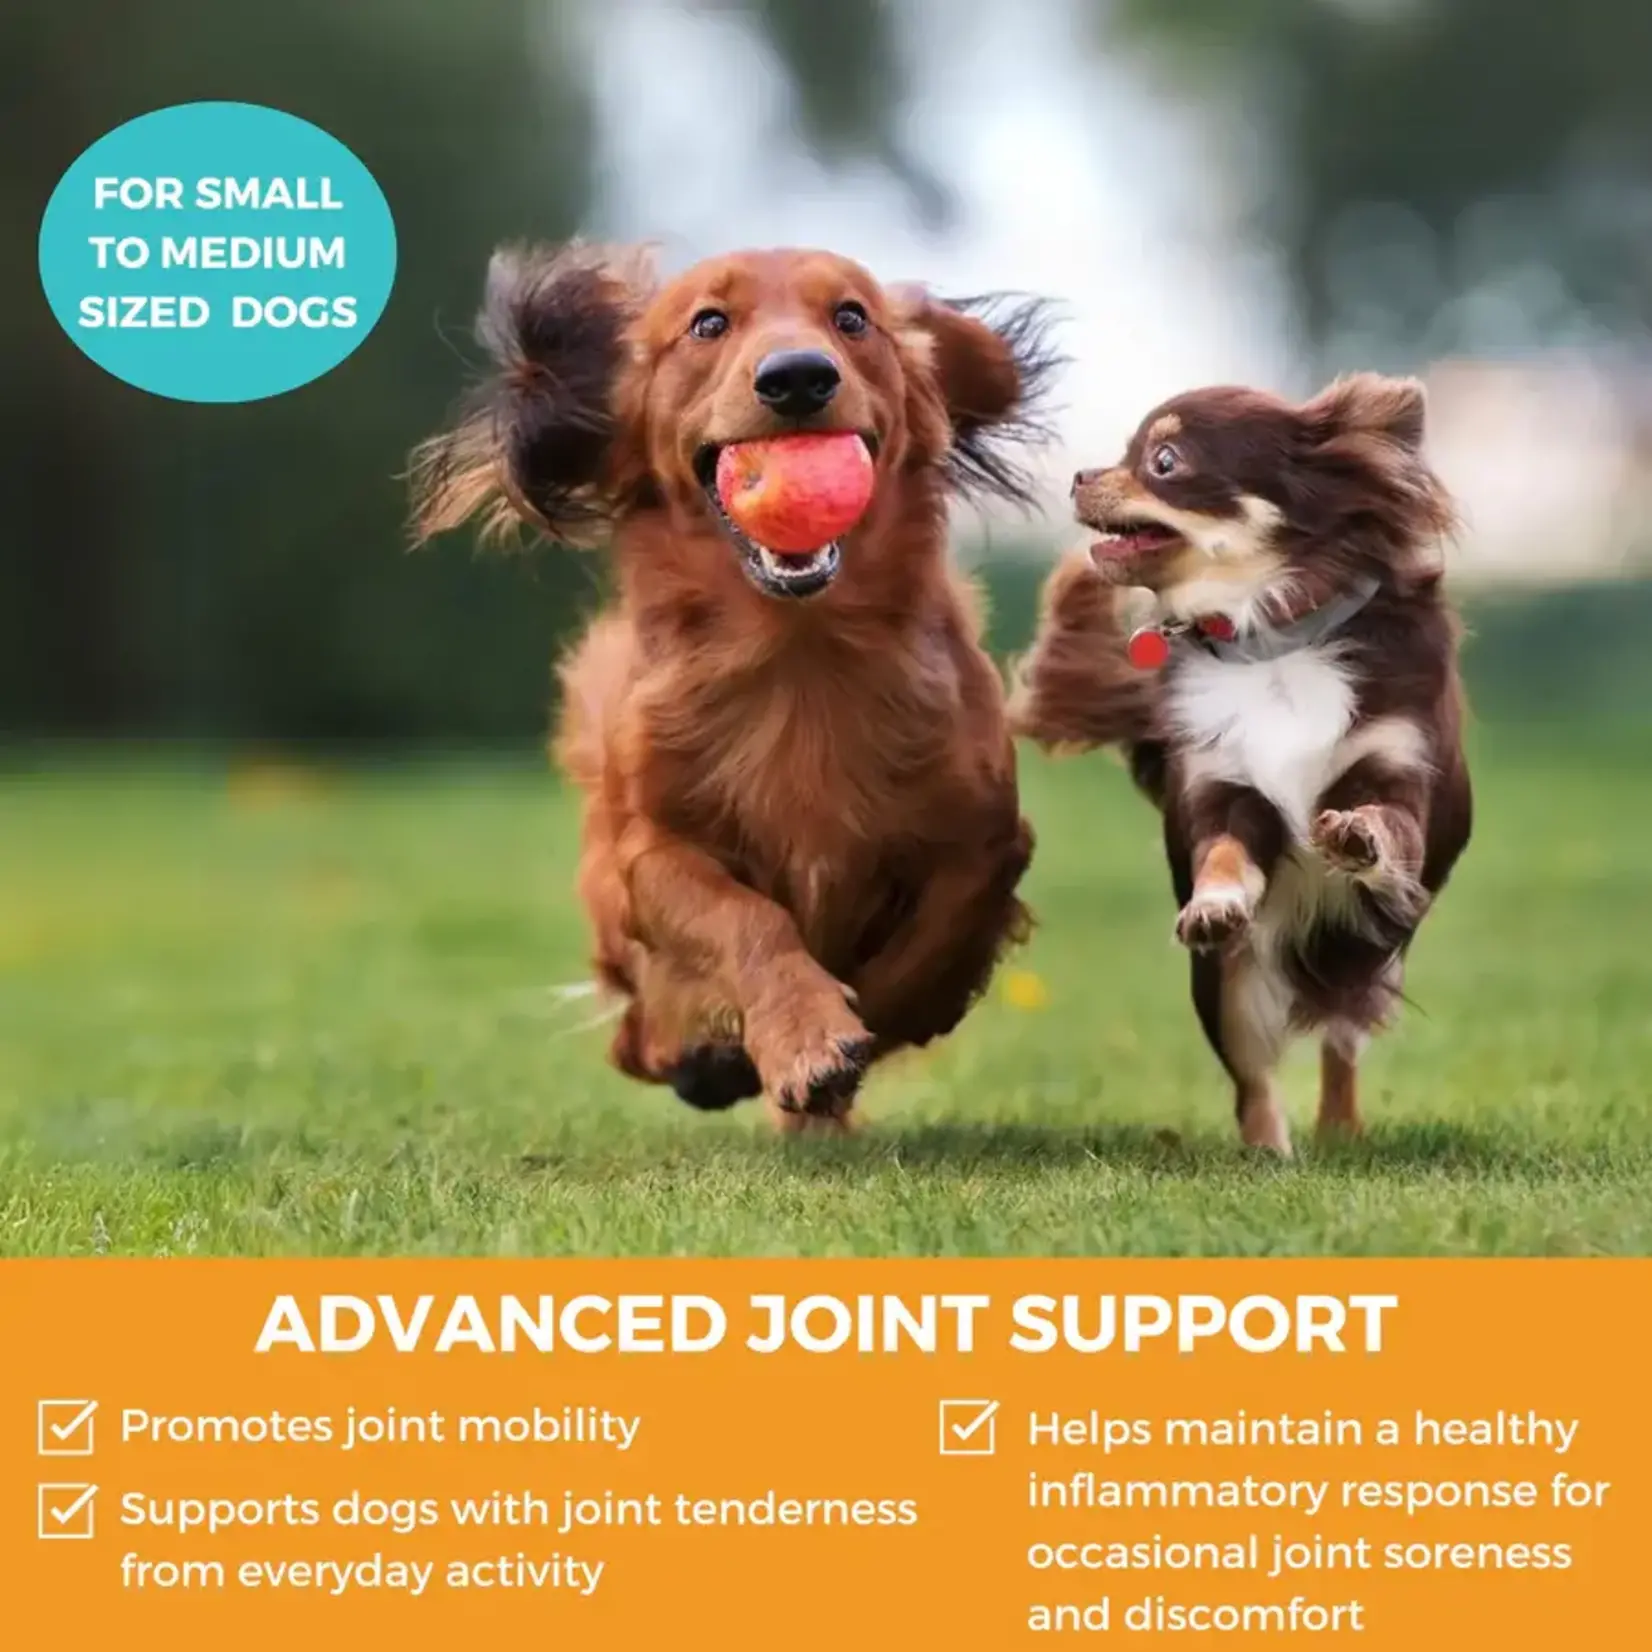 Nootie Nootie Progility Minis Hip & Joint Soft Chew Supplement for Small & Medium Dogs 60ct.